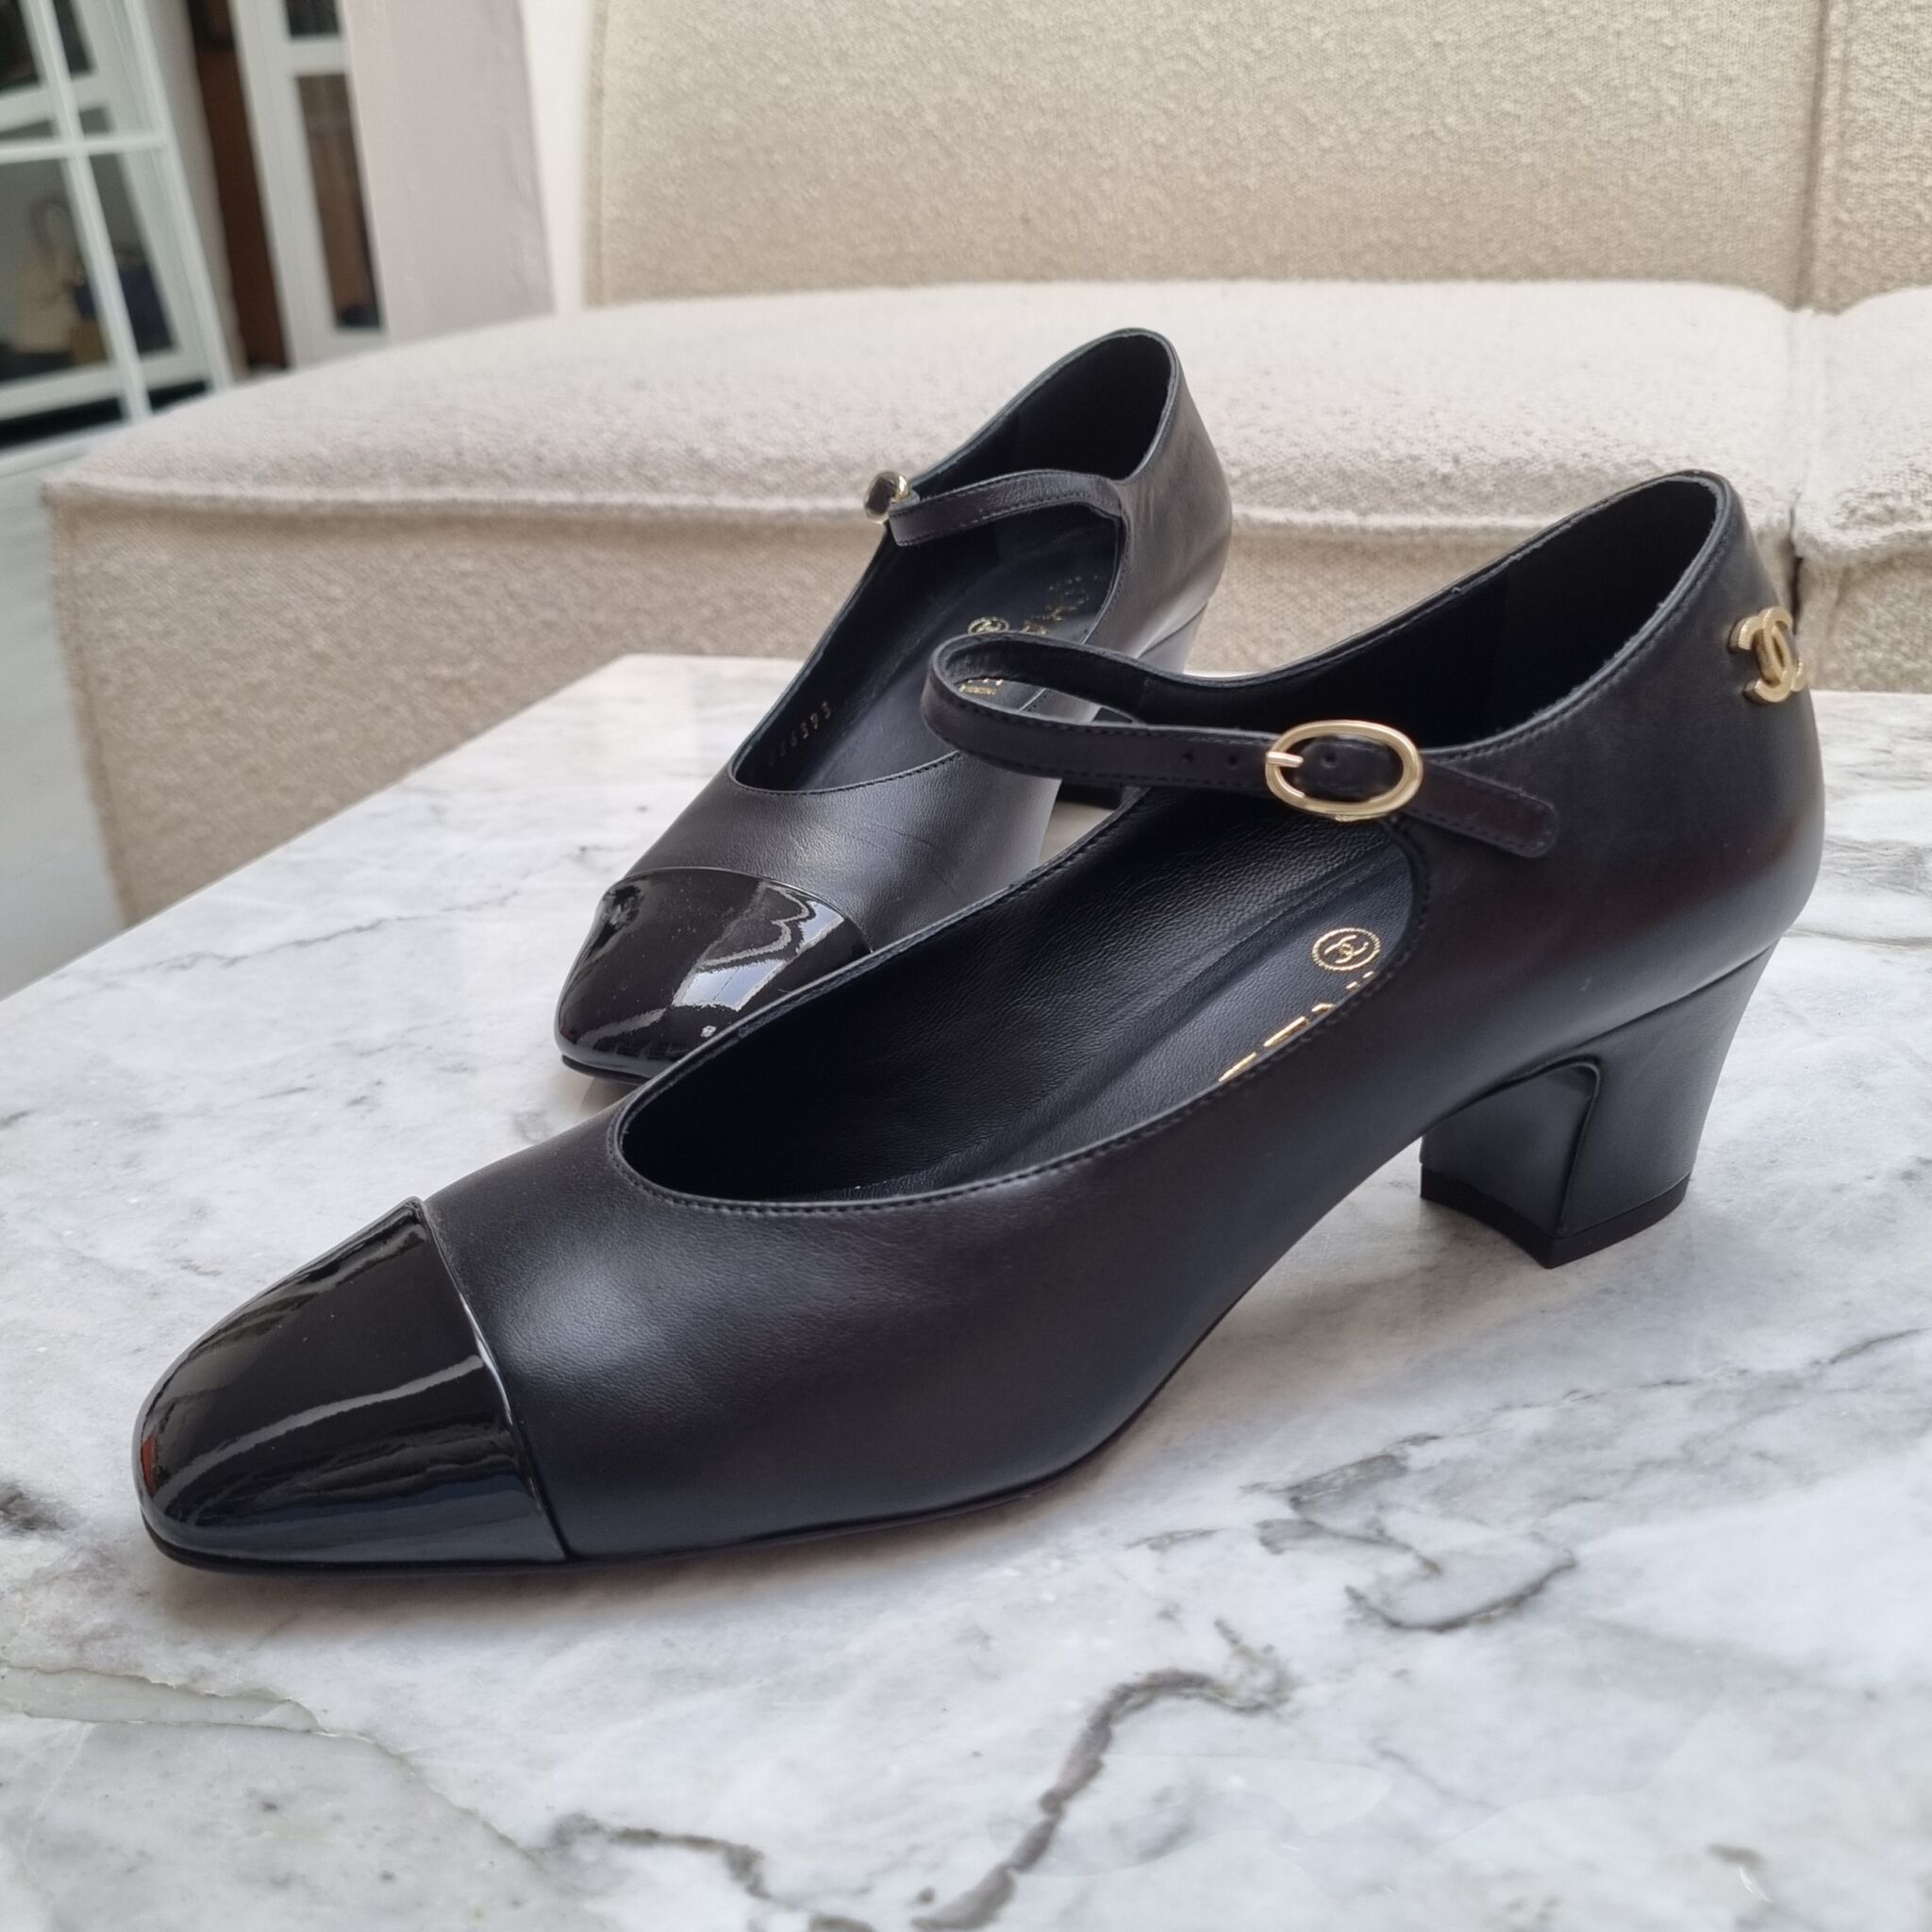 Chanel Black Leather Patent Cap-Toe Mary-Janes Pumps - US size 7.5